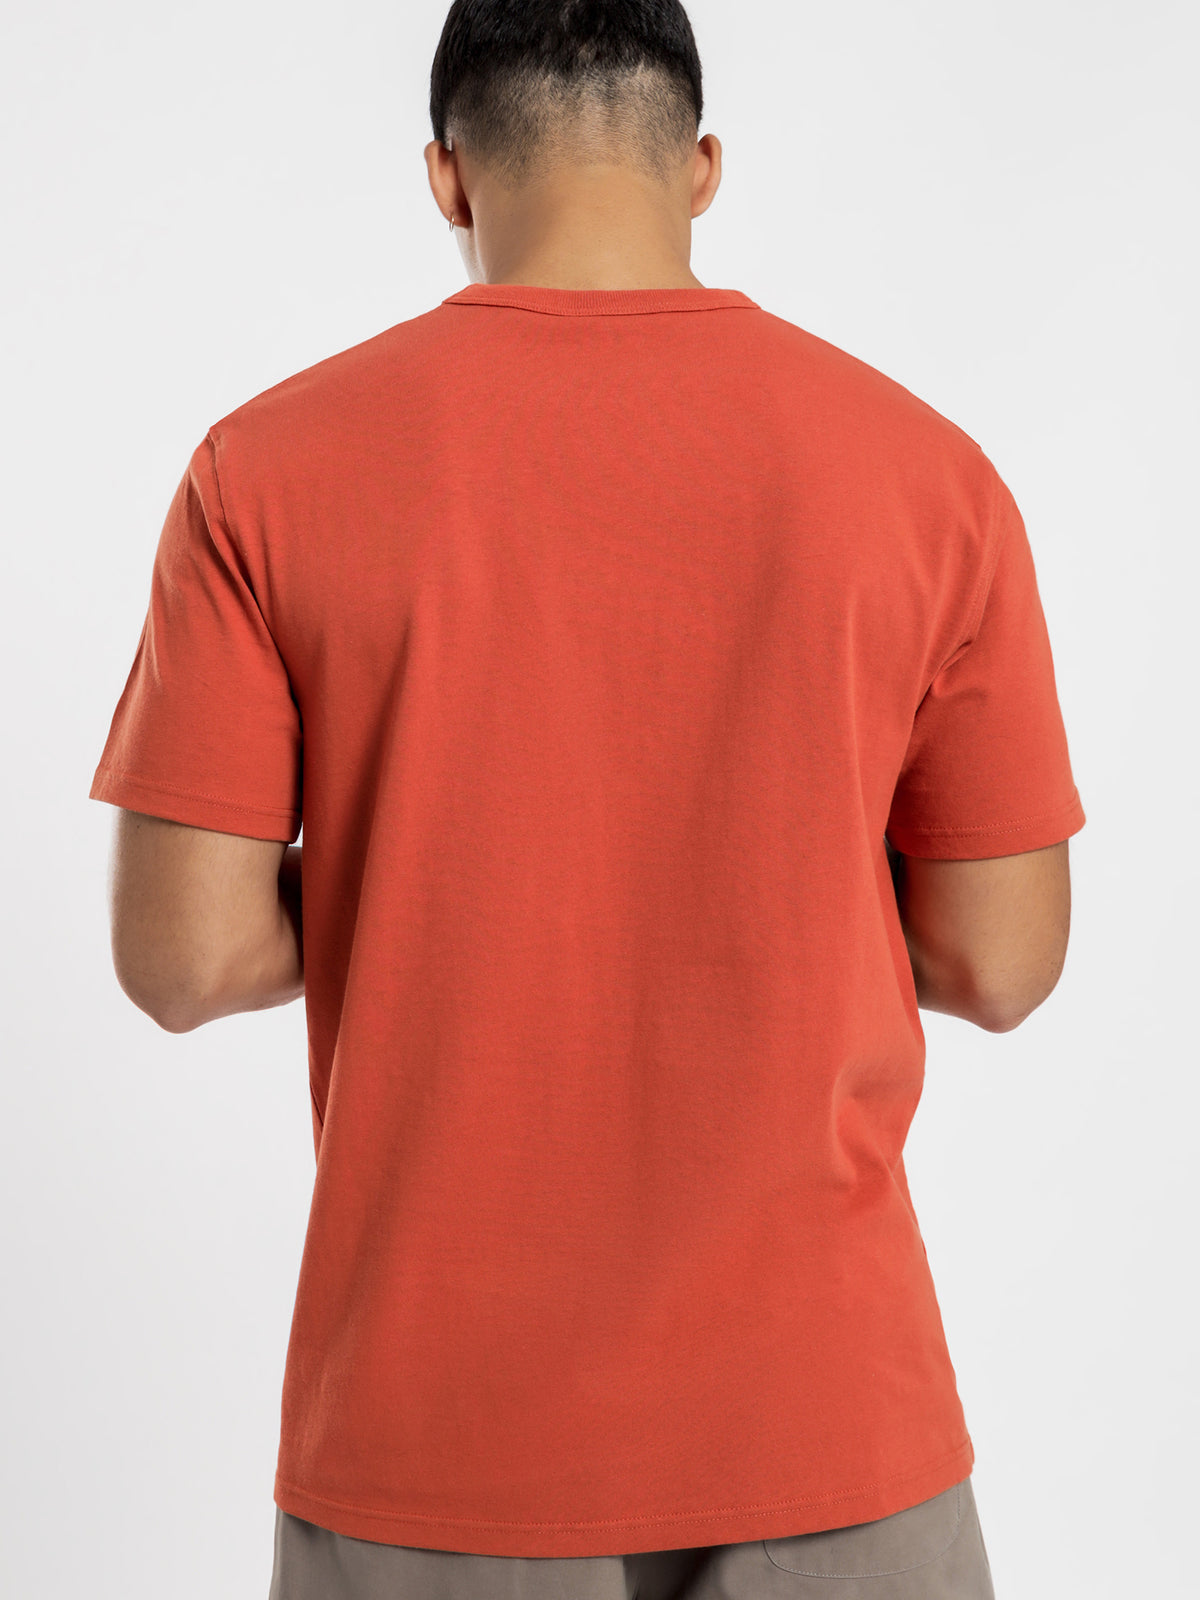 Heritage T-Shirt in Ambitious Orange